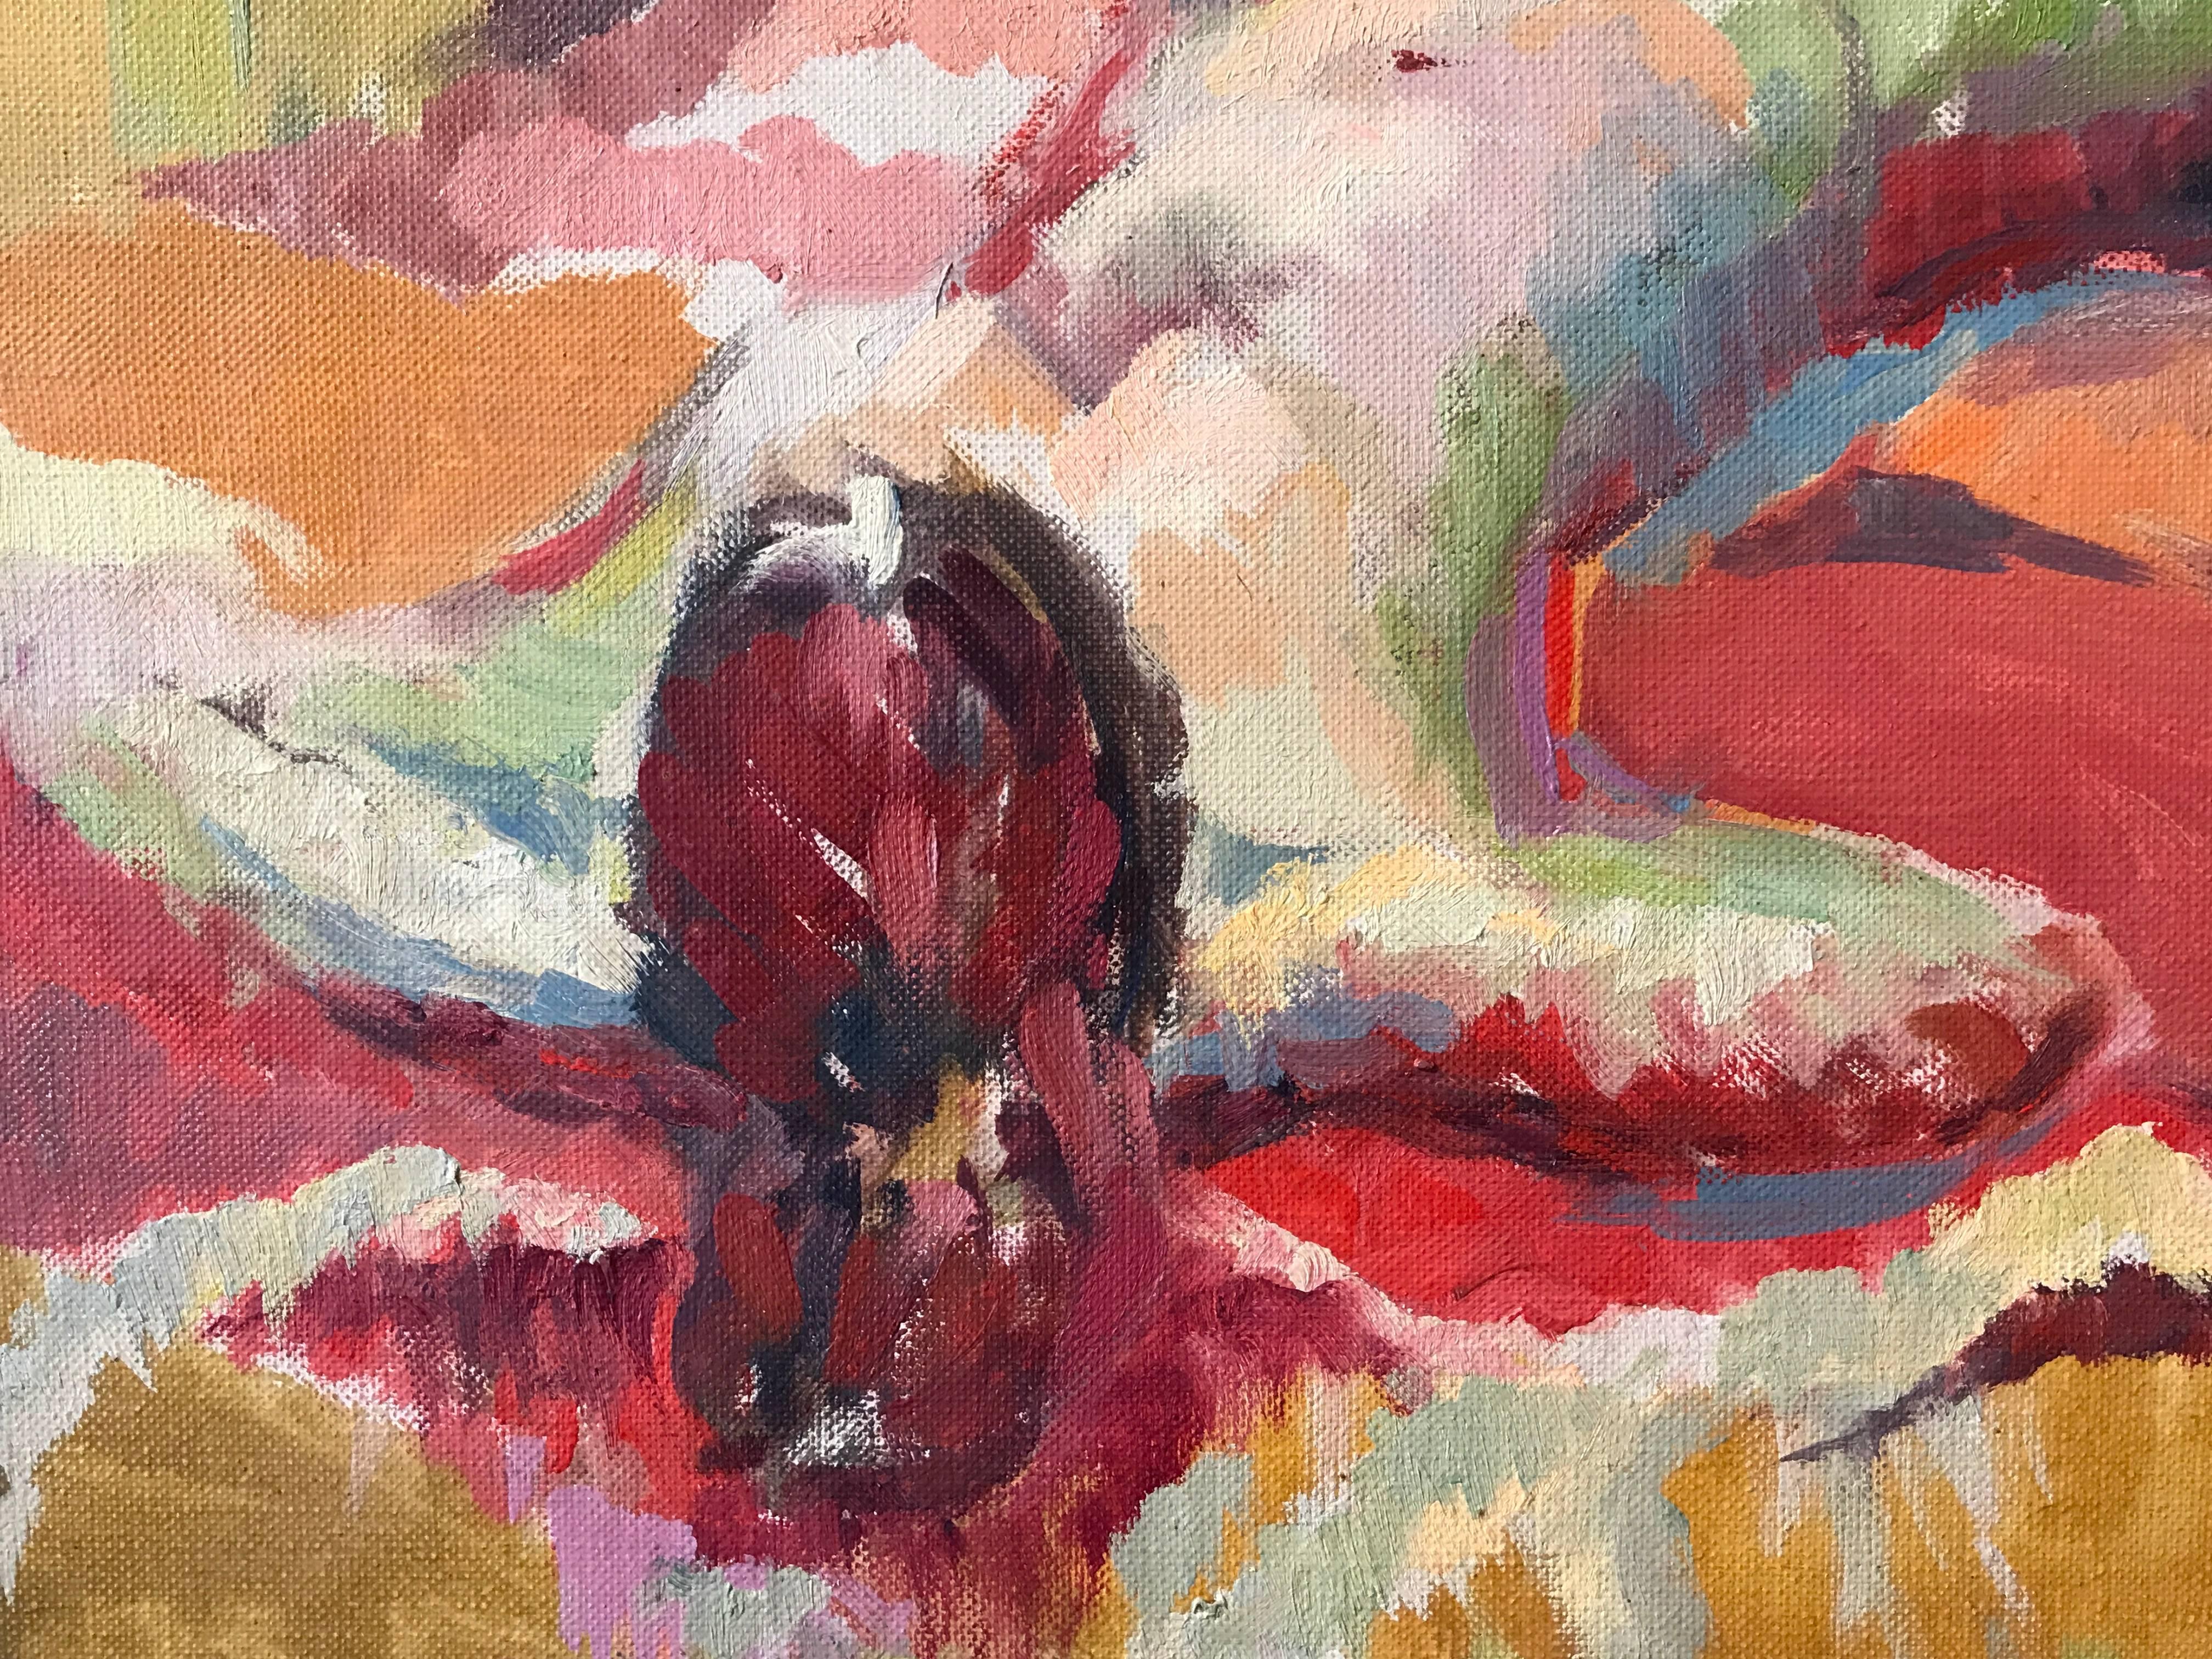 Superbly colorful mid-20th century British Impressionist oil painting on canvas, depicting this reclining nude lady. Painted with thick oil and wide, vibrant brushwork and a beautiful array of colors that immediately catch the eye and lighten any